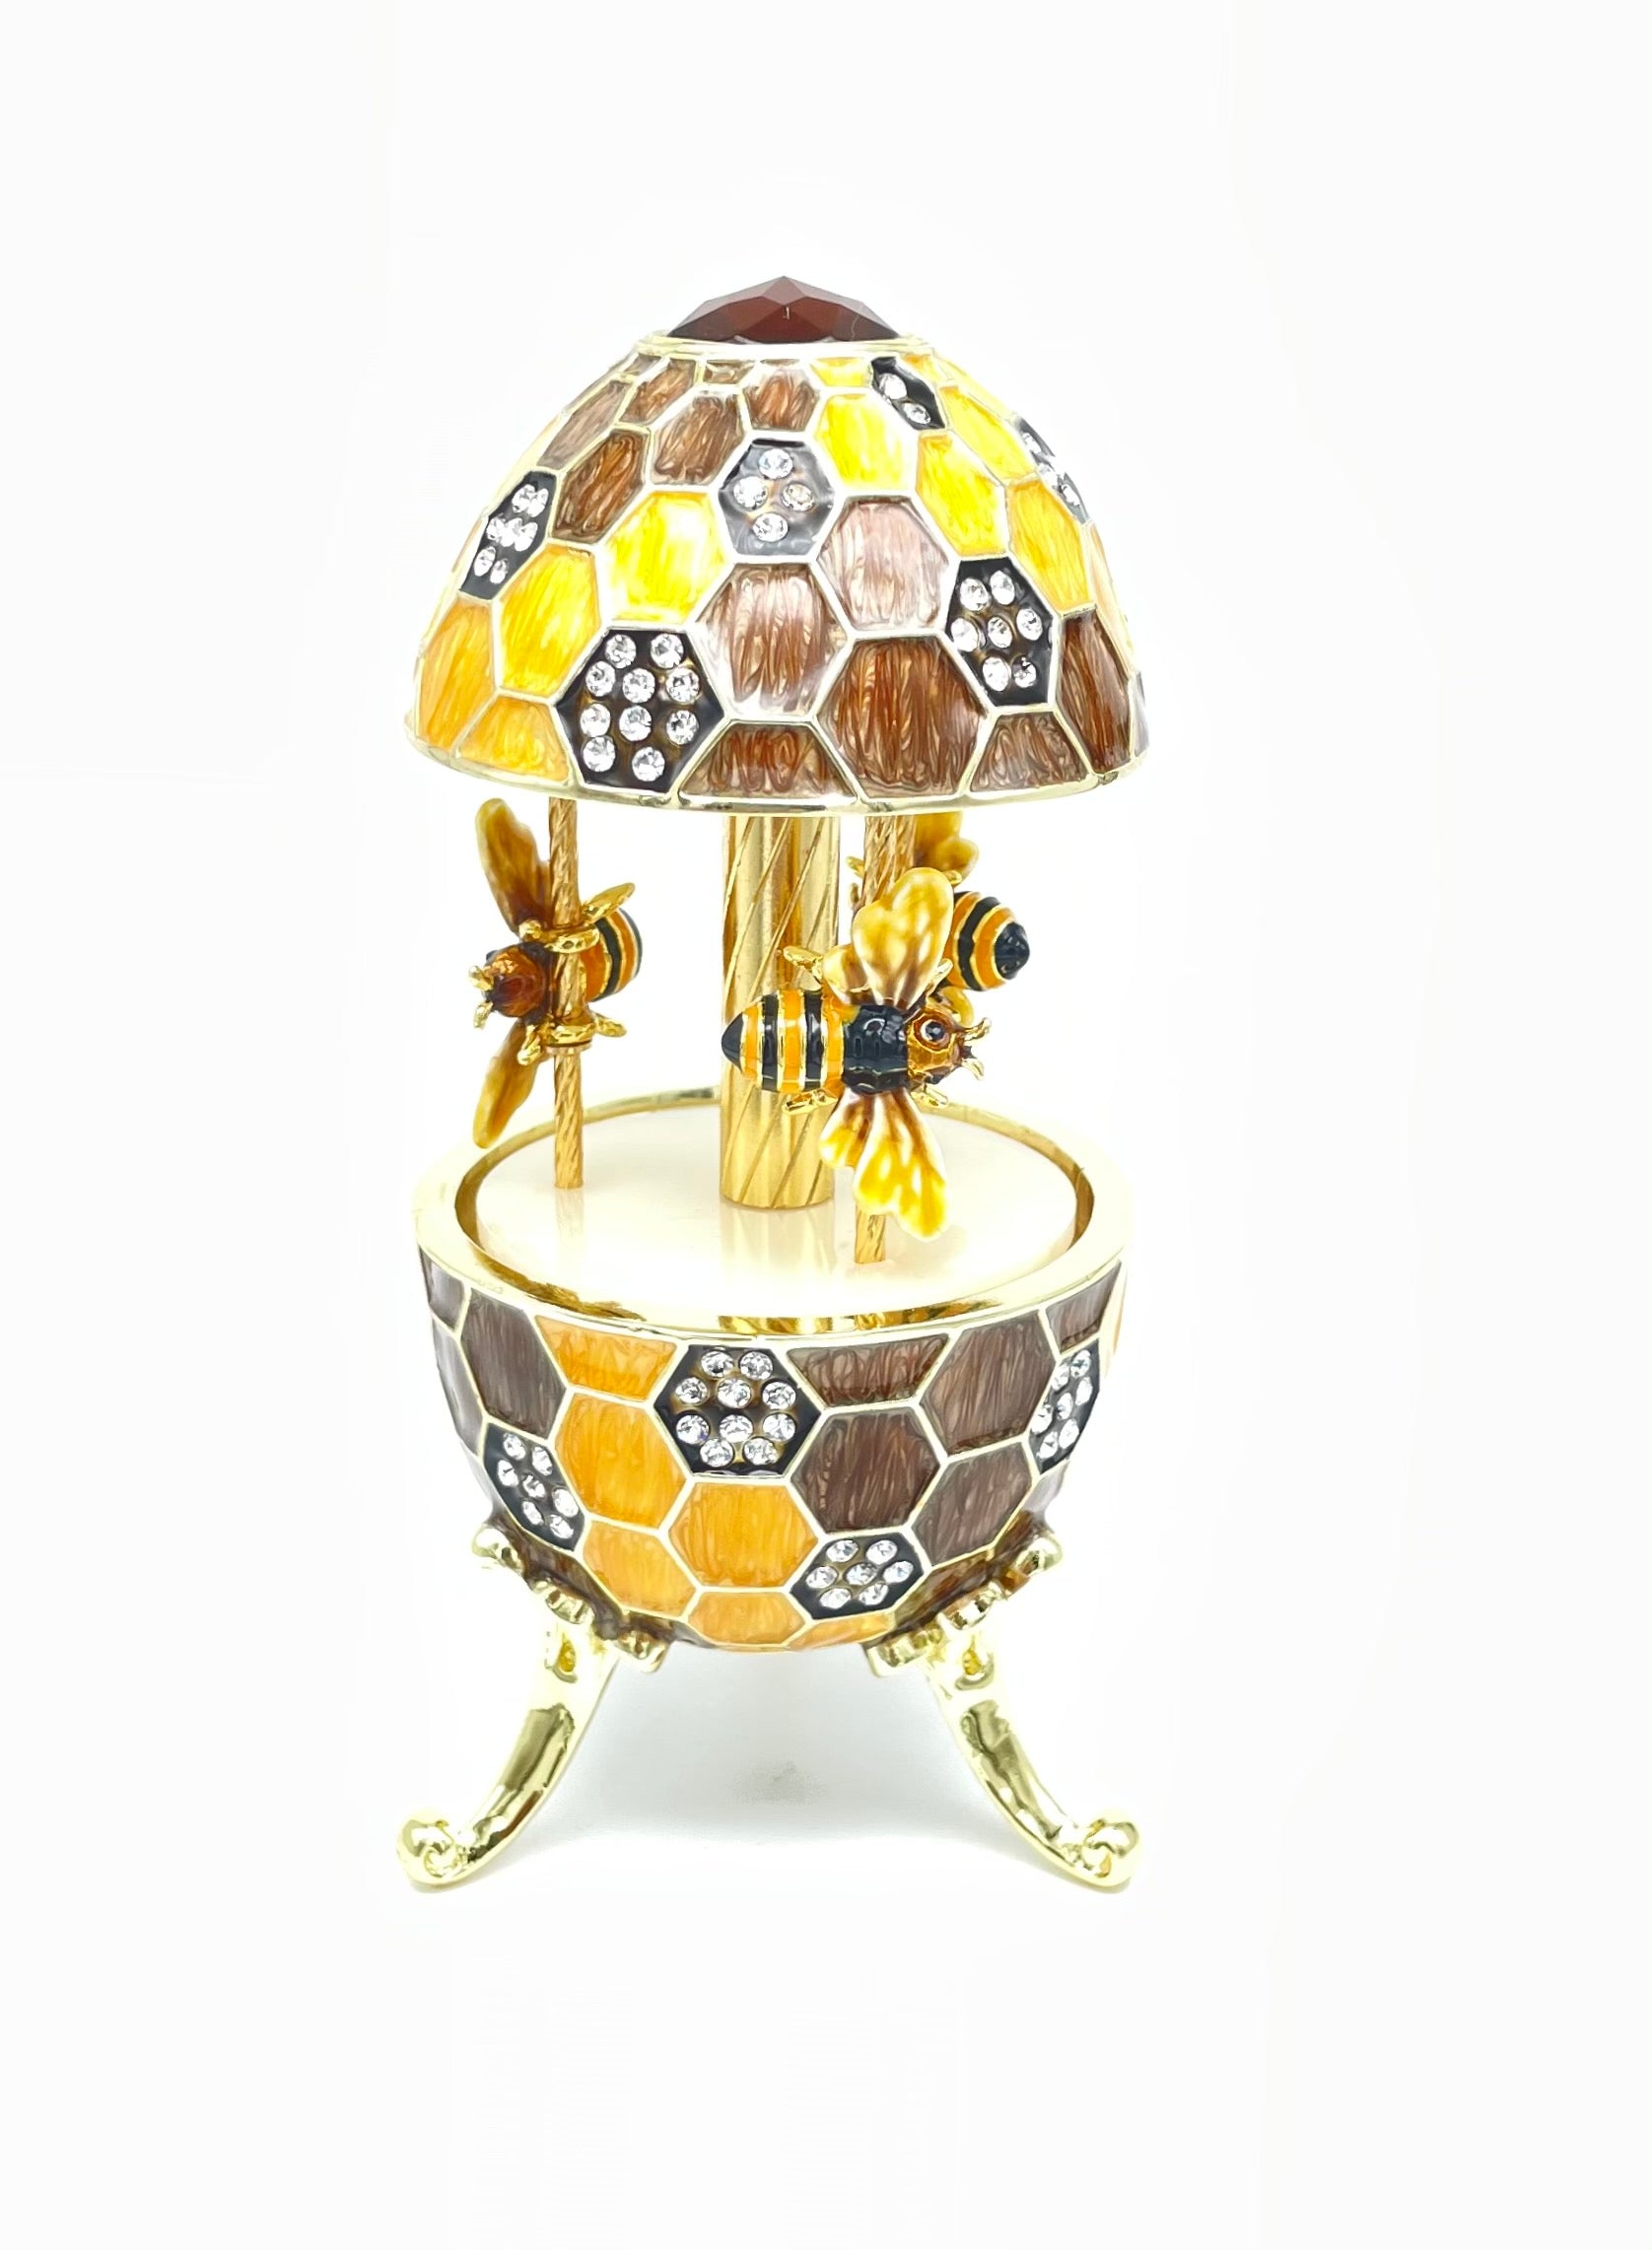 beehive Musical Carousel with Bees